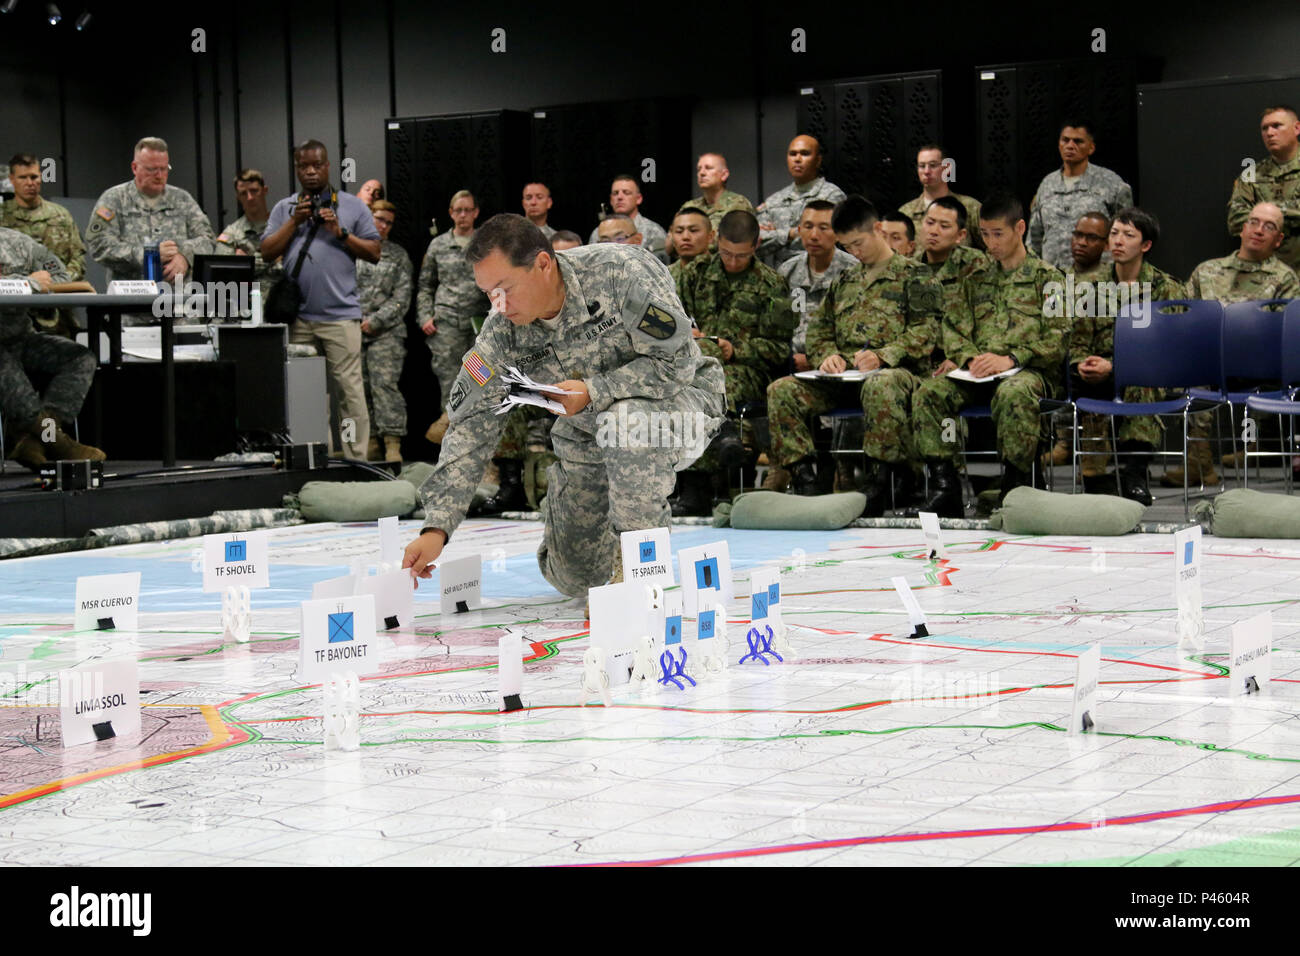 Maj. Timothy Escobar, staff judge advocate officer, 303rd Maneuver Enhancement Brigade, positions capabilities and asset targets on a simulated training map during exercise Imua Dawn 2016 Combined Arms Rehearsal brief, Sagamihara Depot, Japan, June 15, 2016. Exercises such as Imua Dawn 2016 are fundamental training opportunities for military forces to refine techniques to rapidly respond to natural disasters and crises in order to help mitigate human suffering and greater property damage. Without forward deployed forces, rapid and fully capable deployments to provide relief and safety followin Stock Photo